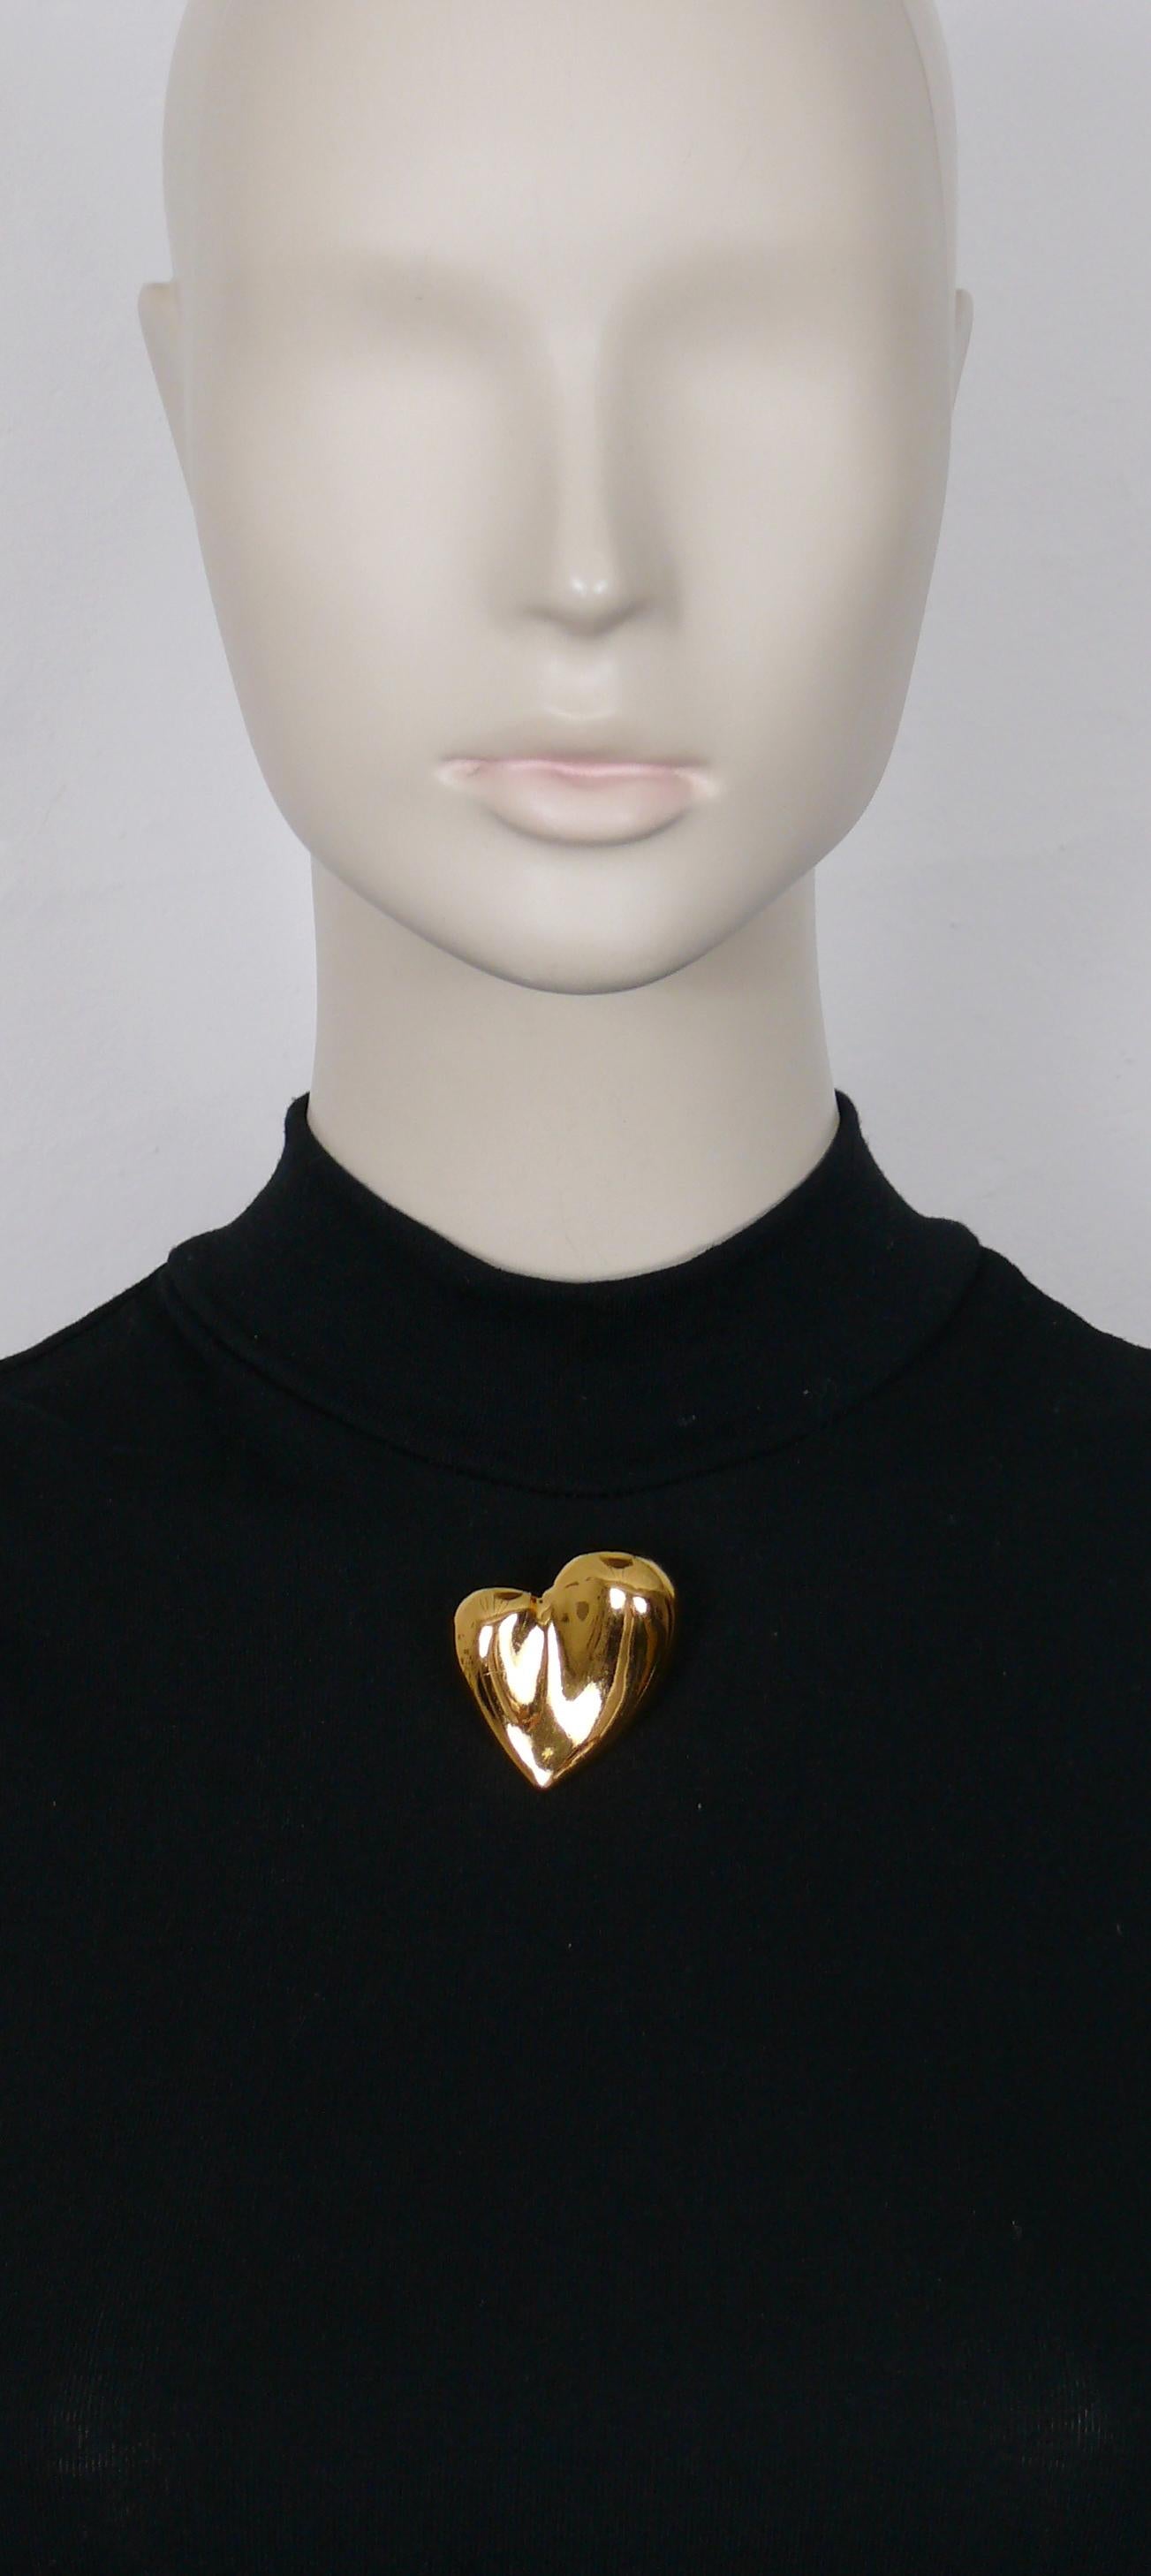 CHRISTIAN LACROIX vintage gold toned resin heart brooch.

Marked CHRISTIAN LACROIX CL Made in France.

Indicative measurements : max. height approx. 4 cm (1.57 inches) / max. width approx. 4 cm (1.57 inches).

NOTES
- This is a preloved vintage